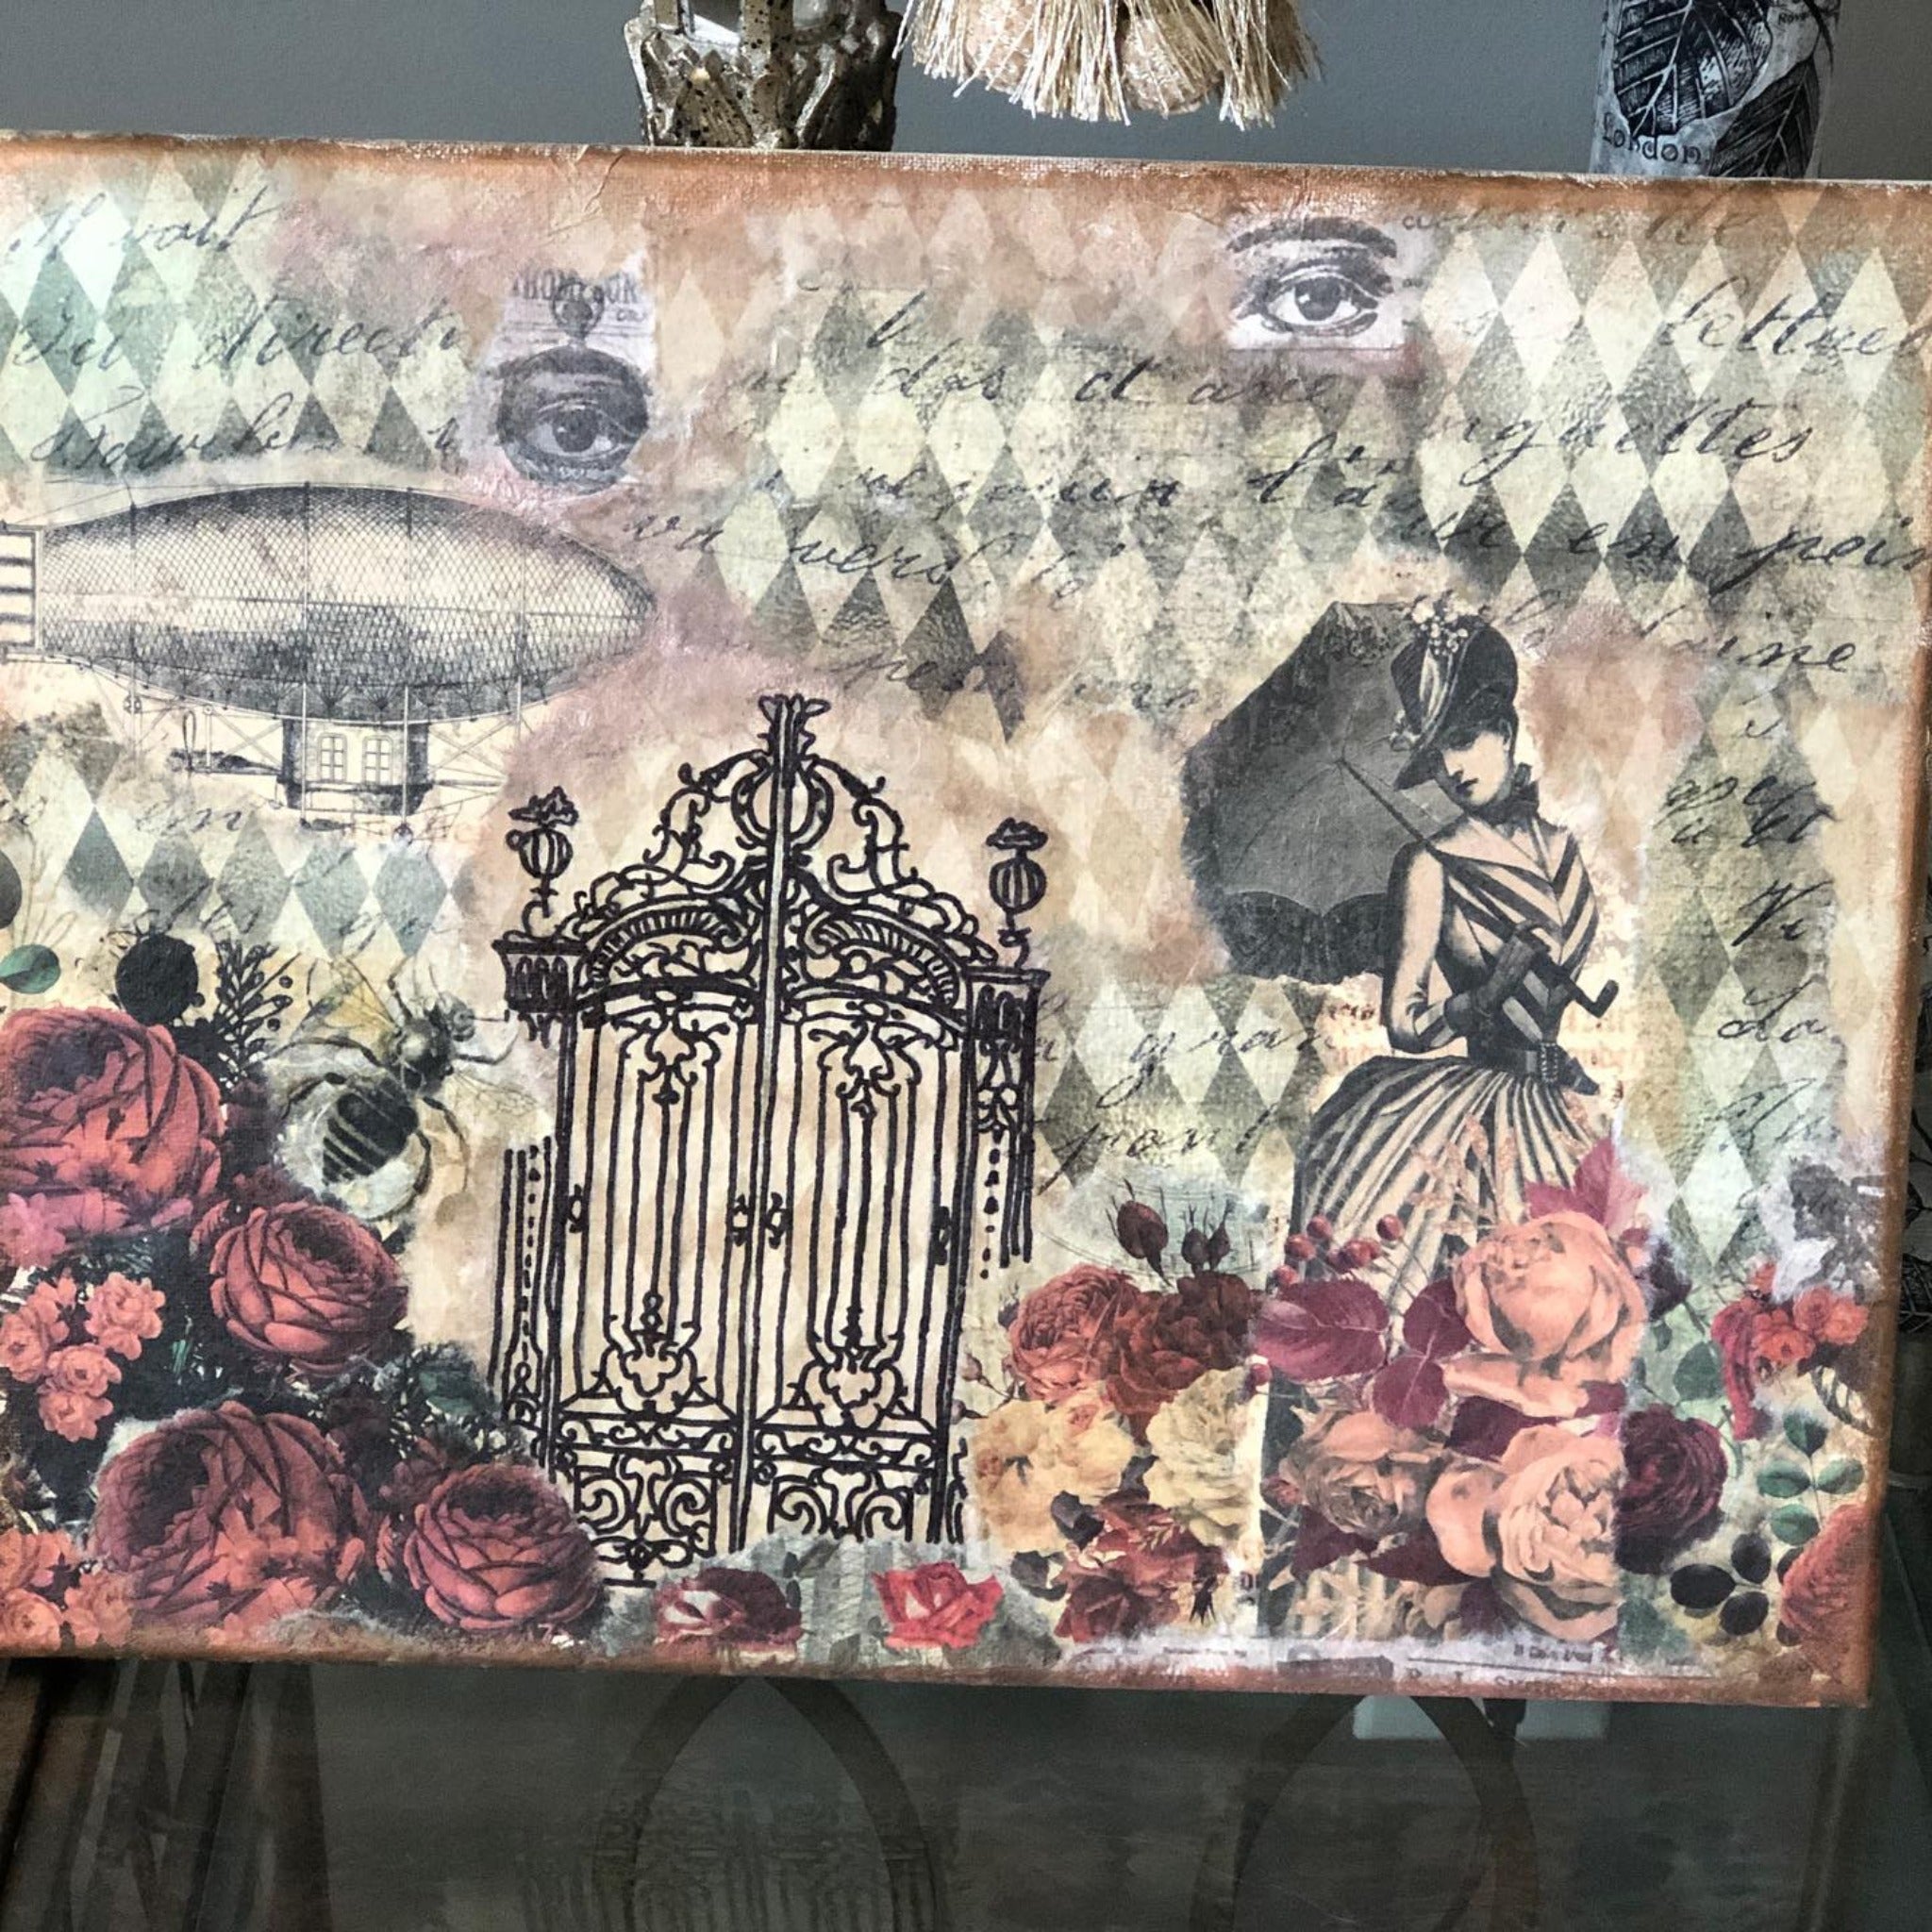 A large canvas features Decoupage Queen's Neutral Harlequin rice paper as a background. In the foreground are roses, an iron ornate gate, a Victorian woman, and a zeppelin airship.